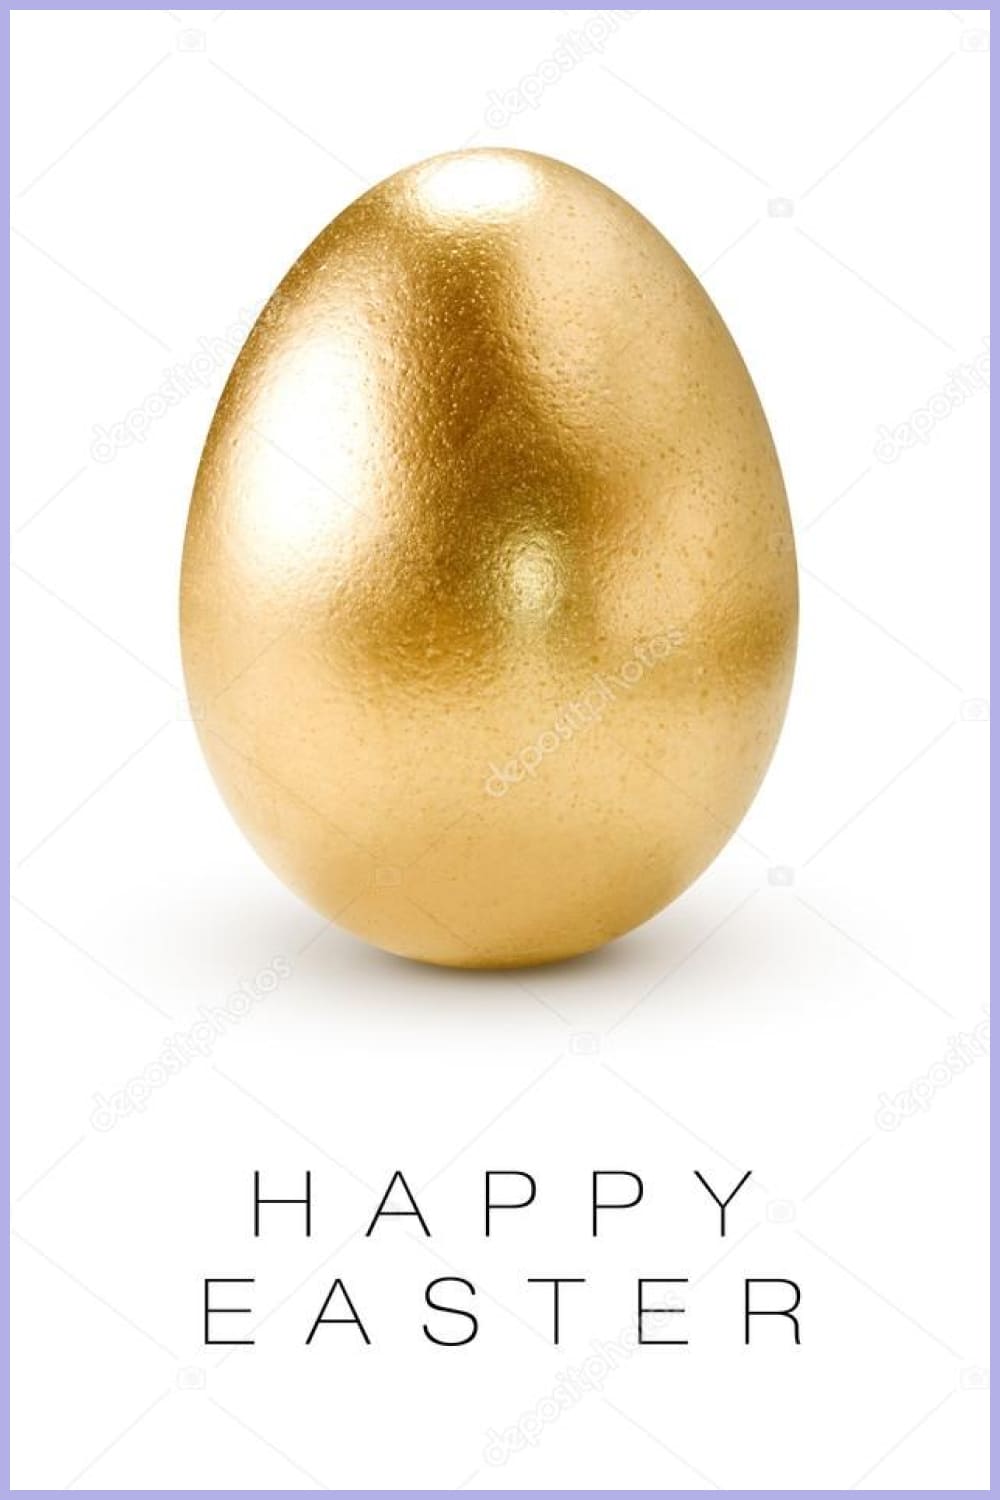 Happy Easter greeting card with gold egg.